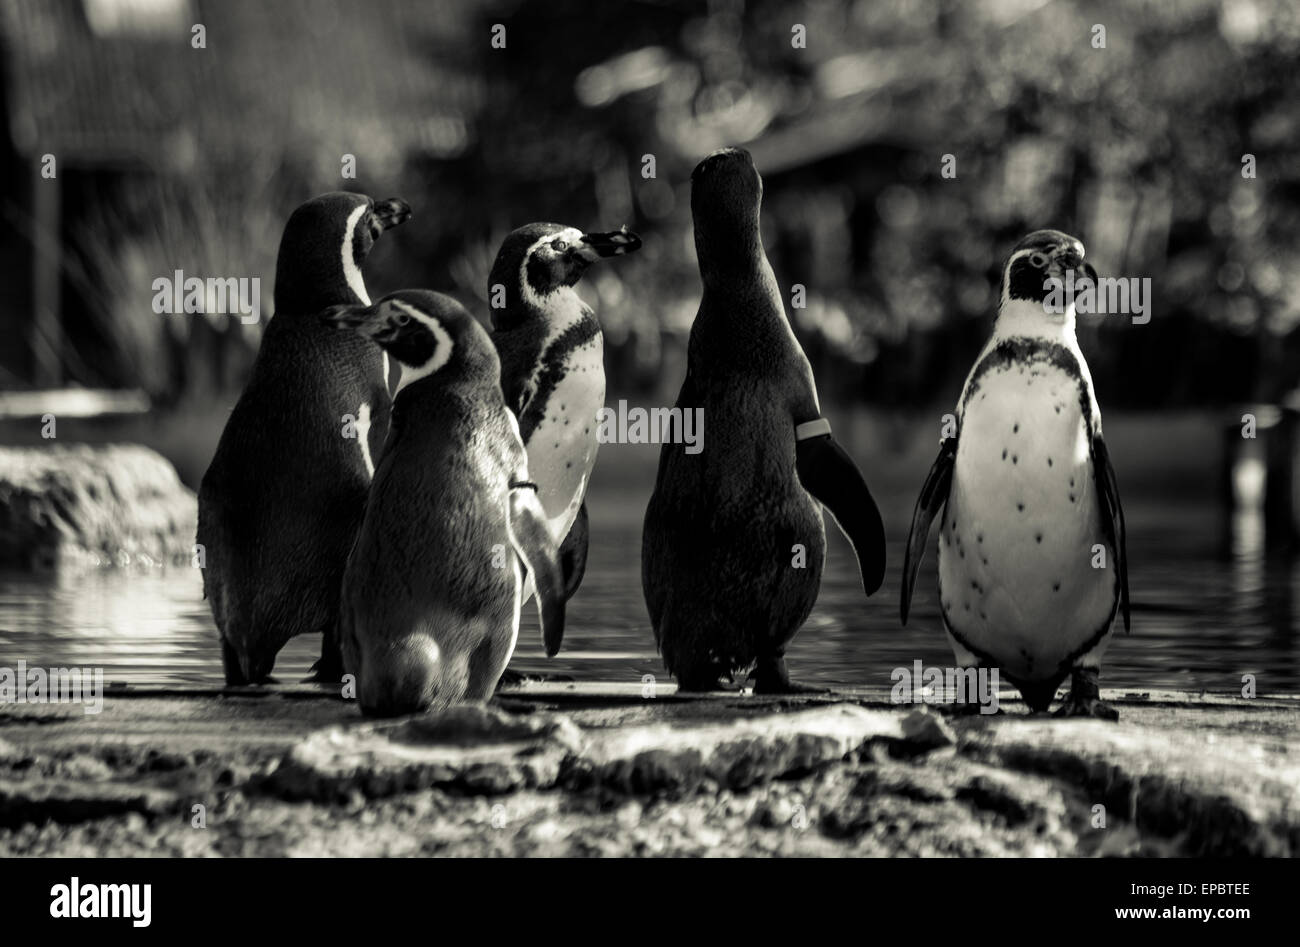 Five funny African Penguins in black and white waddling towards water Stock Photo